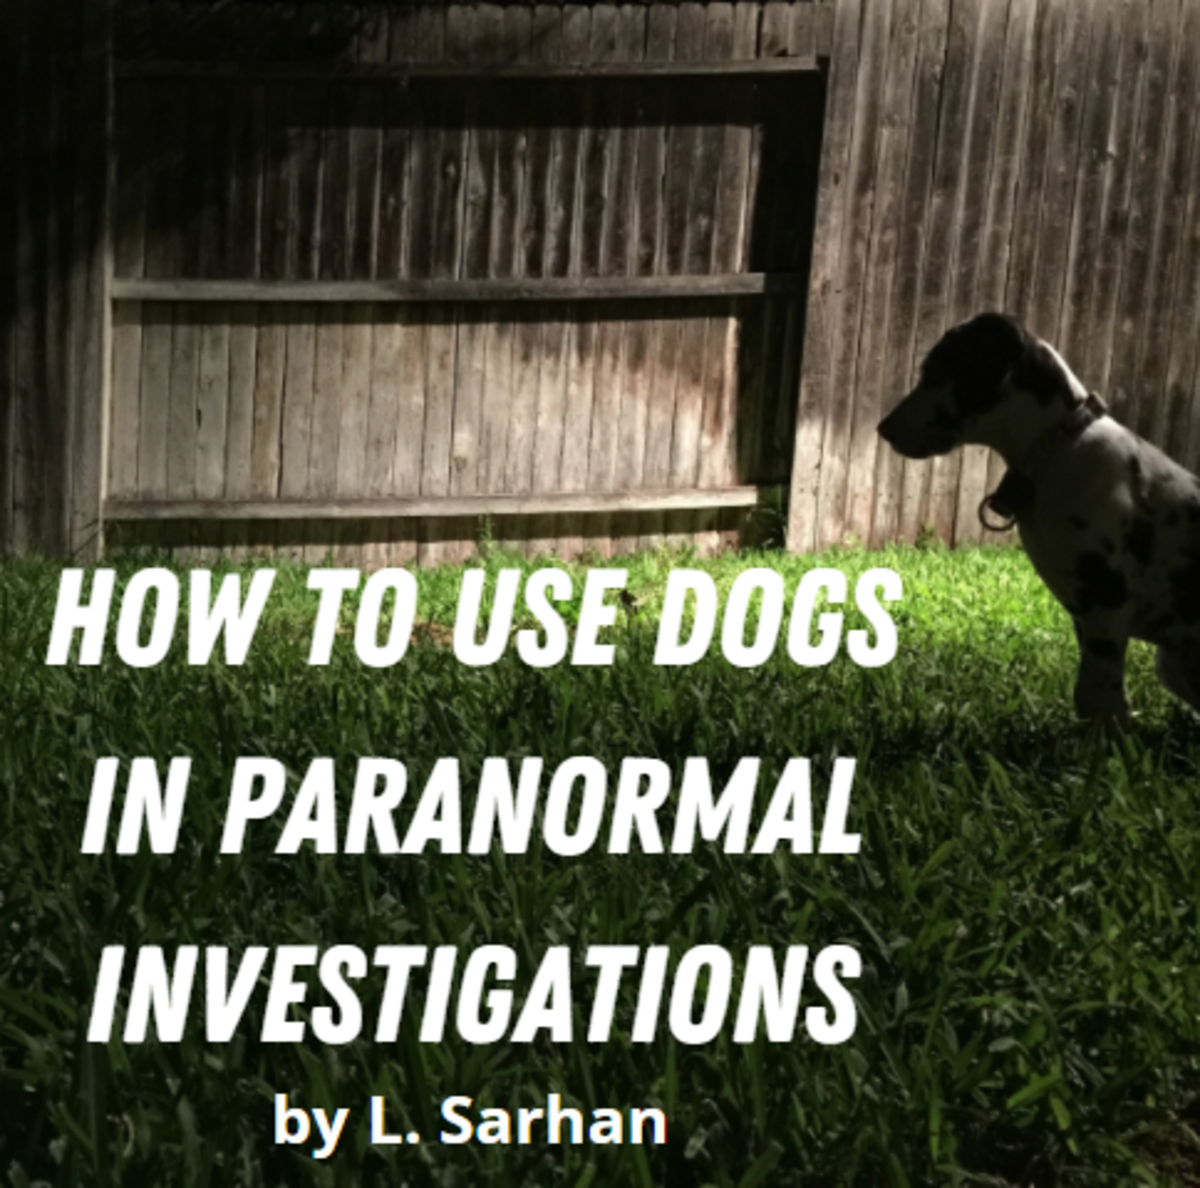 How to Use Dogs in Paranormal Investigations